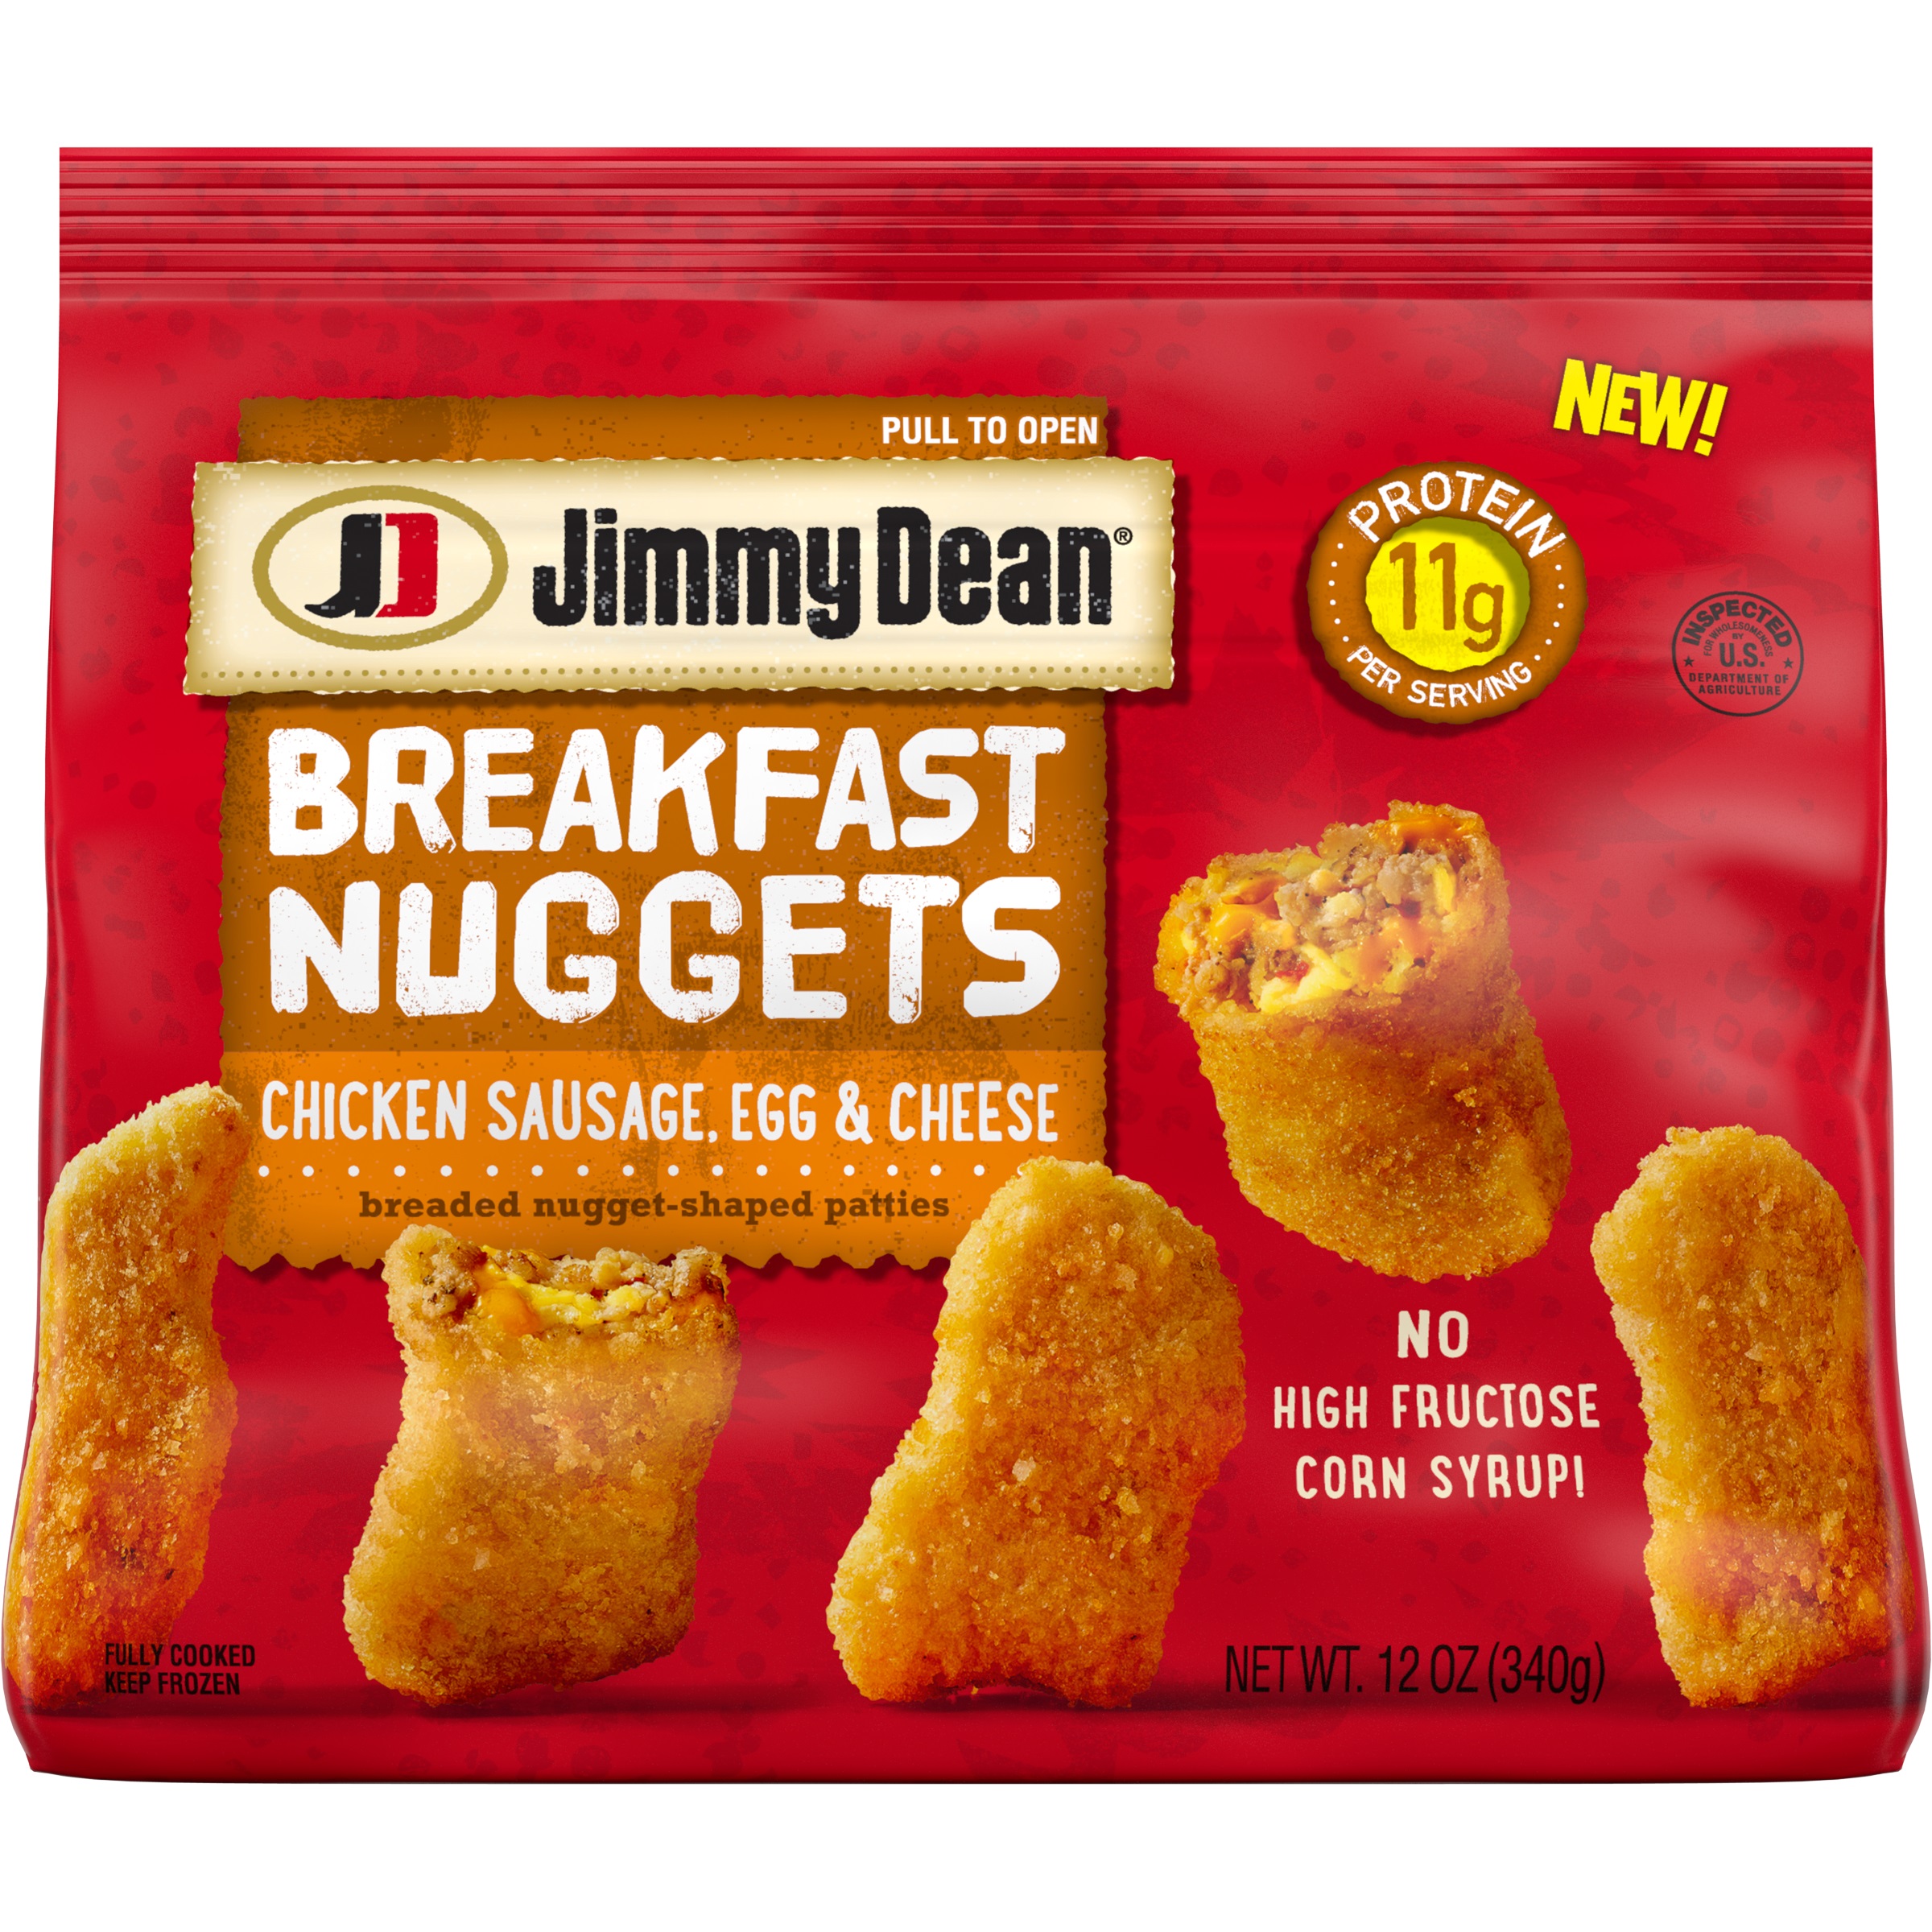 Jimmy Dean Breakfast Nuggets deliver a fun, new twist on a nostalgic family favorite, now for breakfast. Available in two delicious varieties: Sausage, Egg & Cheese and Chicken Sausage, Egg & Cheese